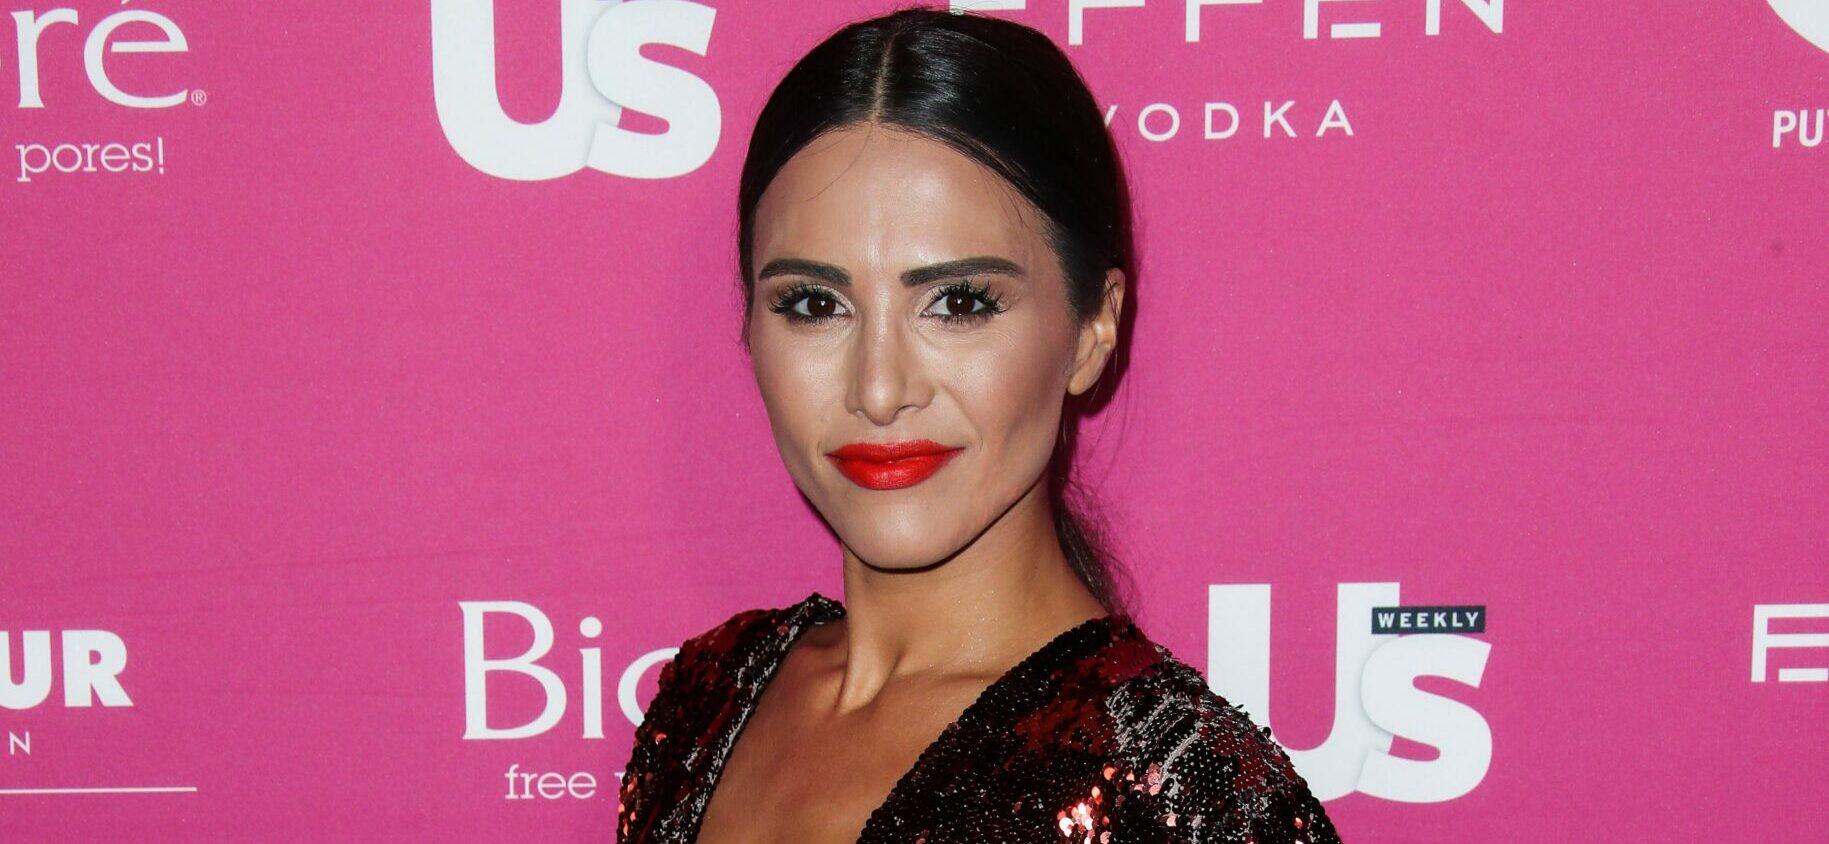 US Weekly's Most Stylish New Yorker Party 2018 held at the Magic Hour Rooftop Bar. 12 Sep 2018 Pictured: Andi Dorfman.